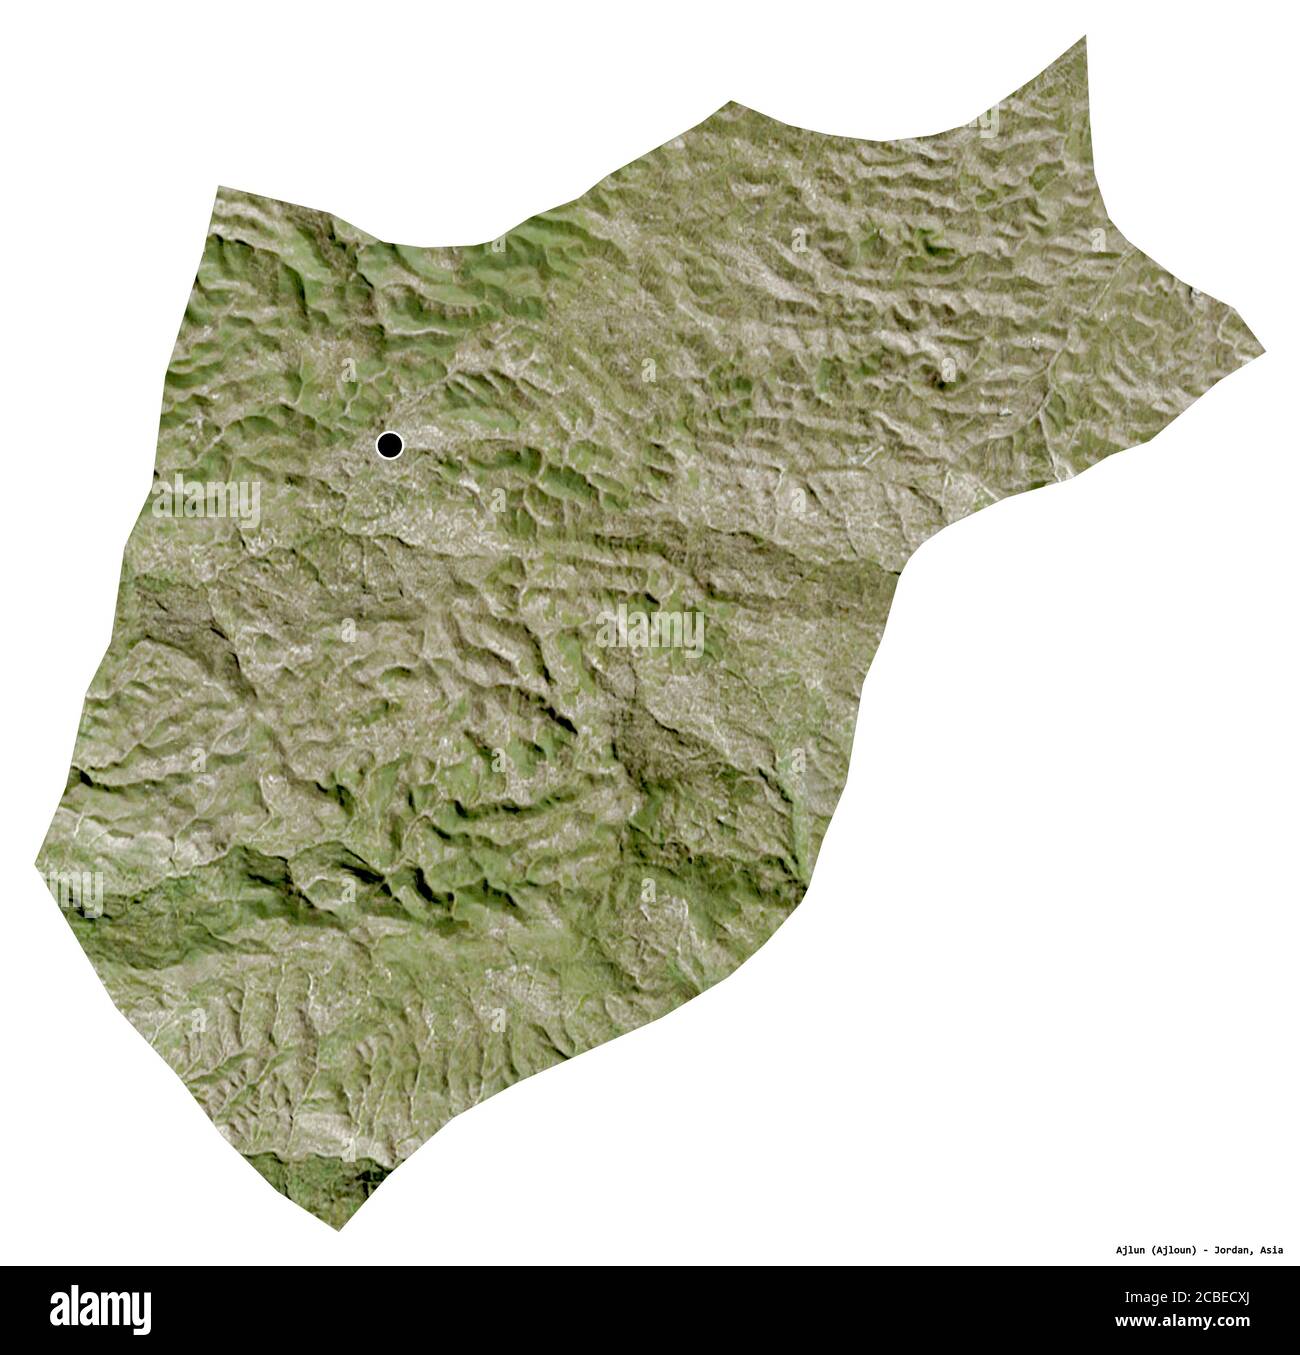 Shape of Ajlun, province of Jordan, with its capital isolated on white background. Satellite imagery. 3D rendering Stock Photo